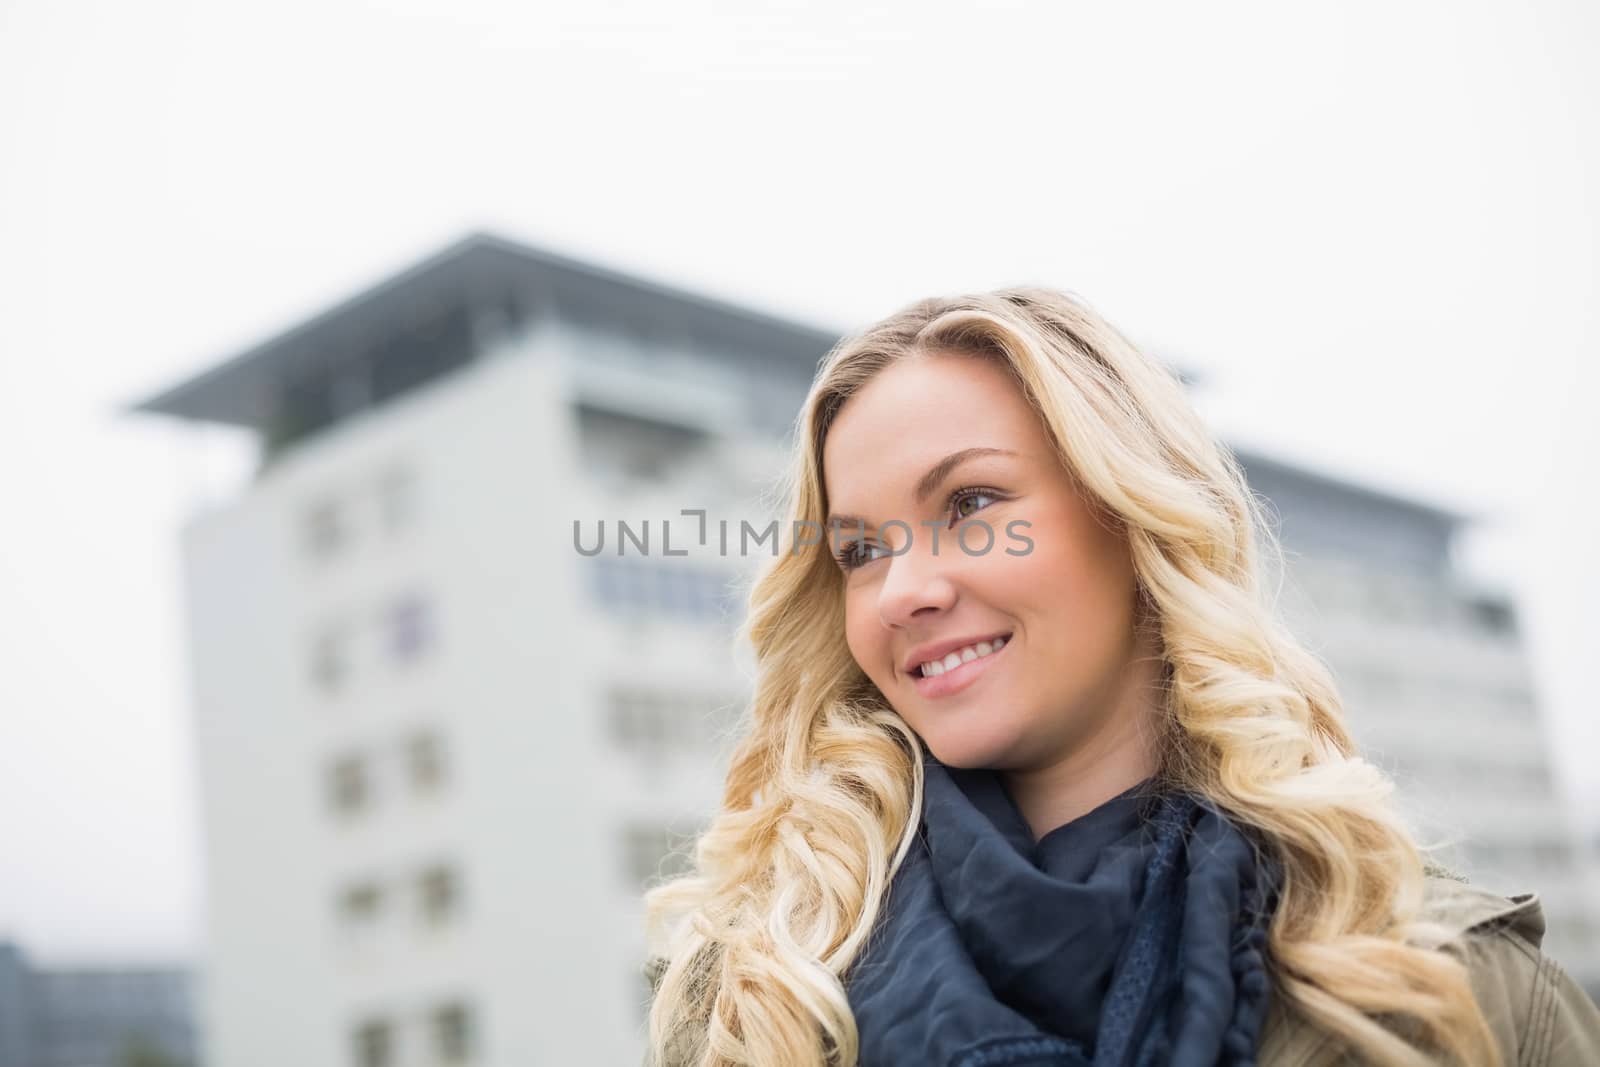 Cheerful trendy blonde posing outdoors on urban background